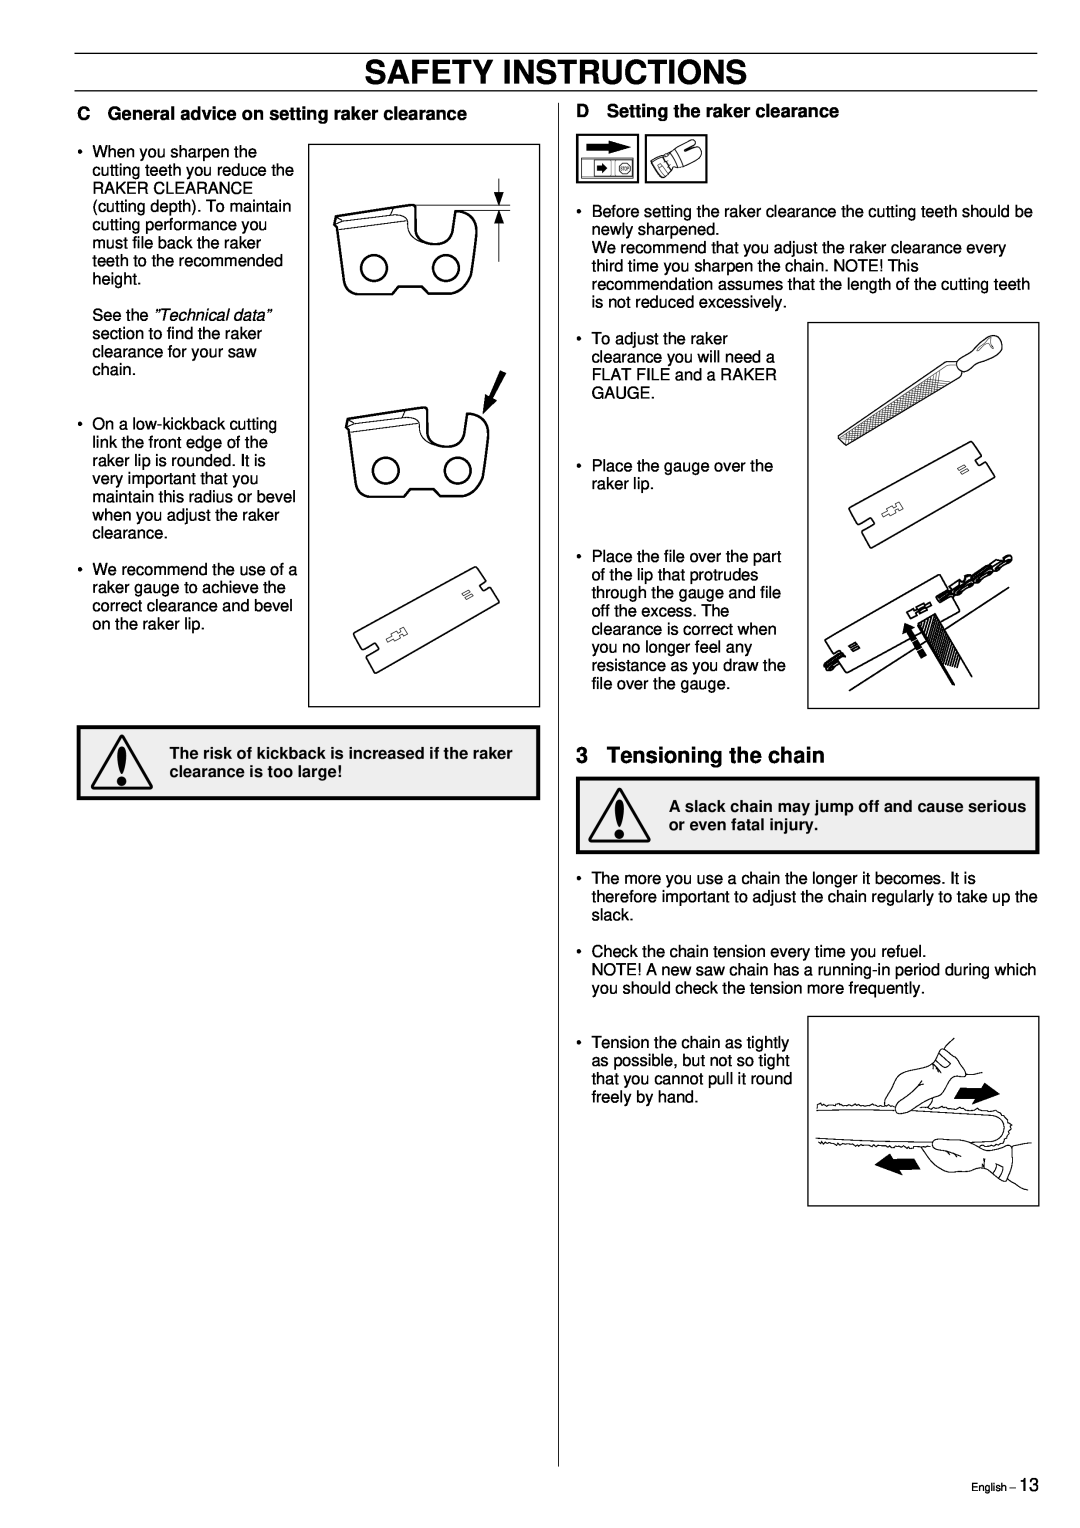 Husqvarna 395XP manual Safety Instructions, Tensioning the chain, C General advice on setting raker clearance 